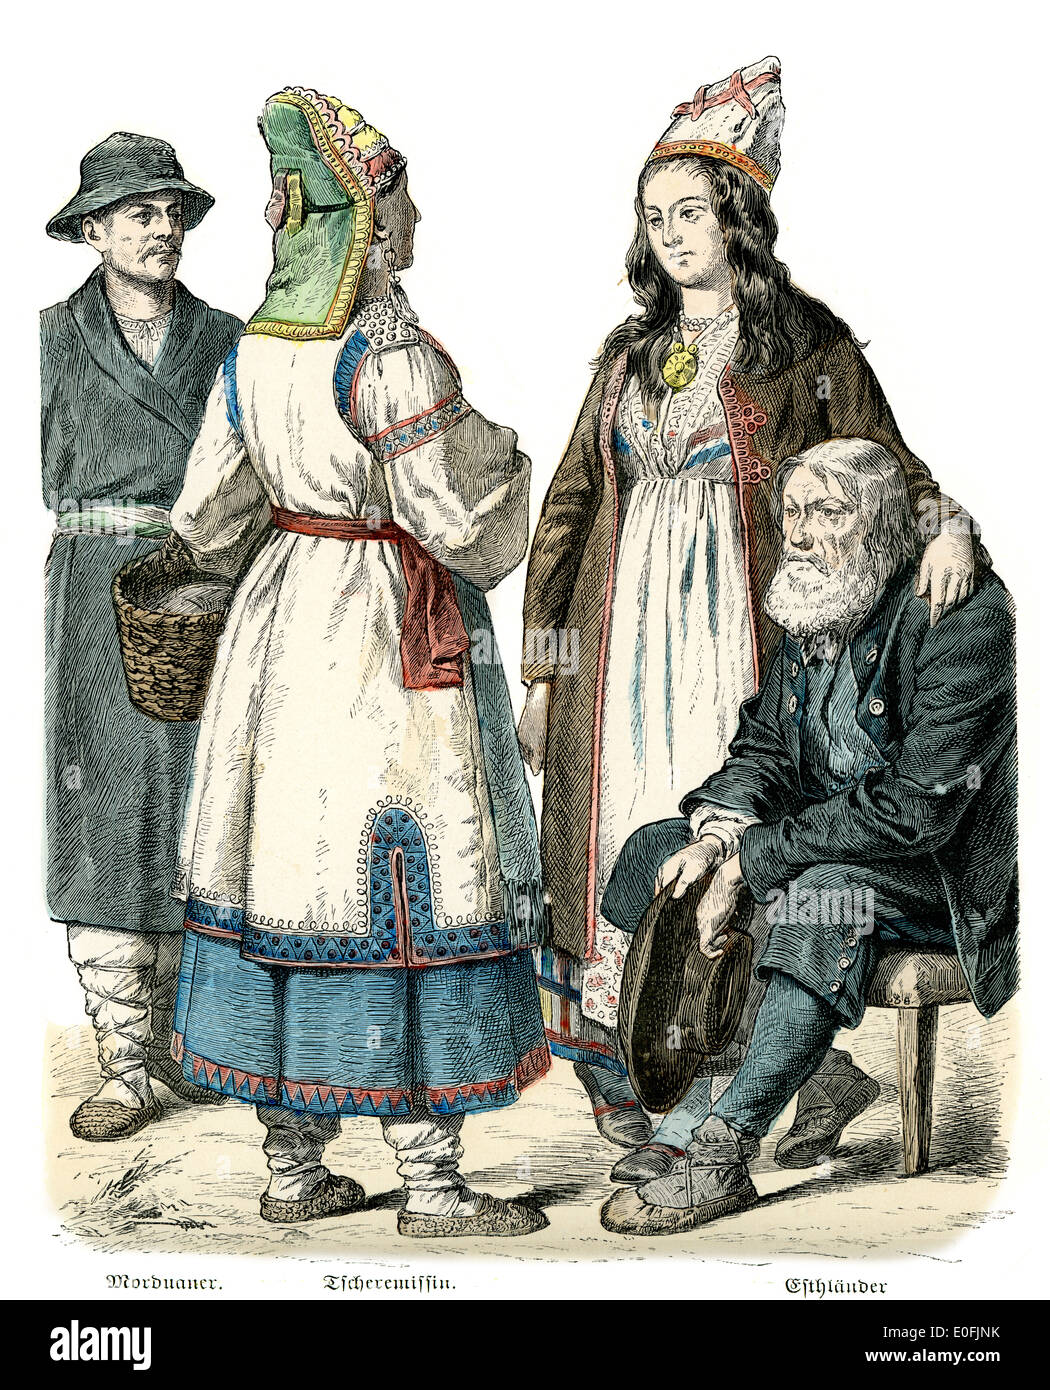 Traditional costumes of Russia, 19th Century. Morduaner, Tscheremissin (Fins from the Volga) and Esthonian. Stock Photo